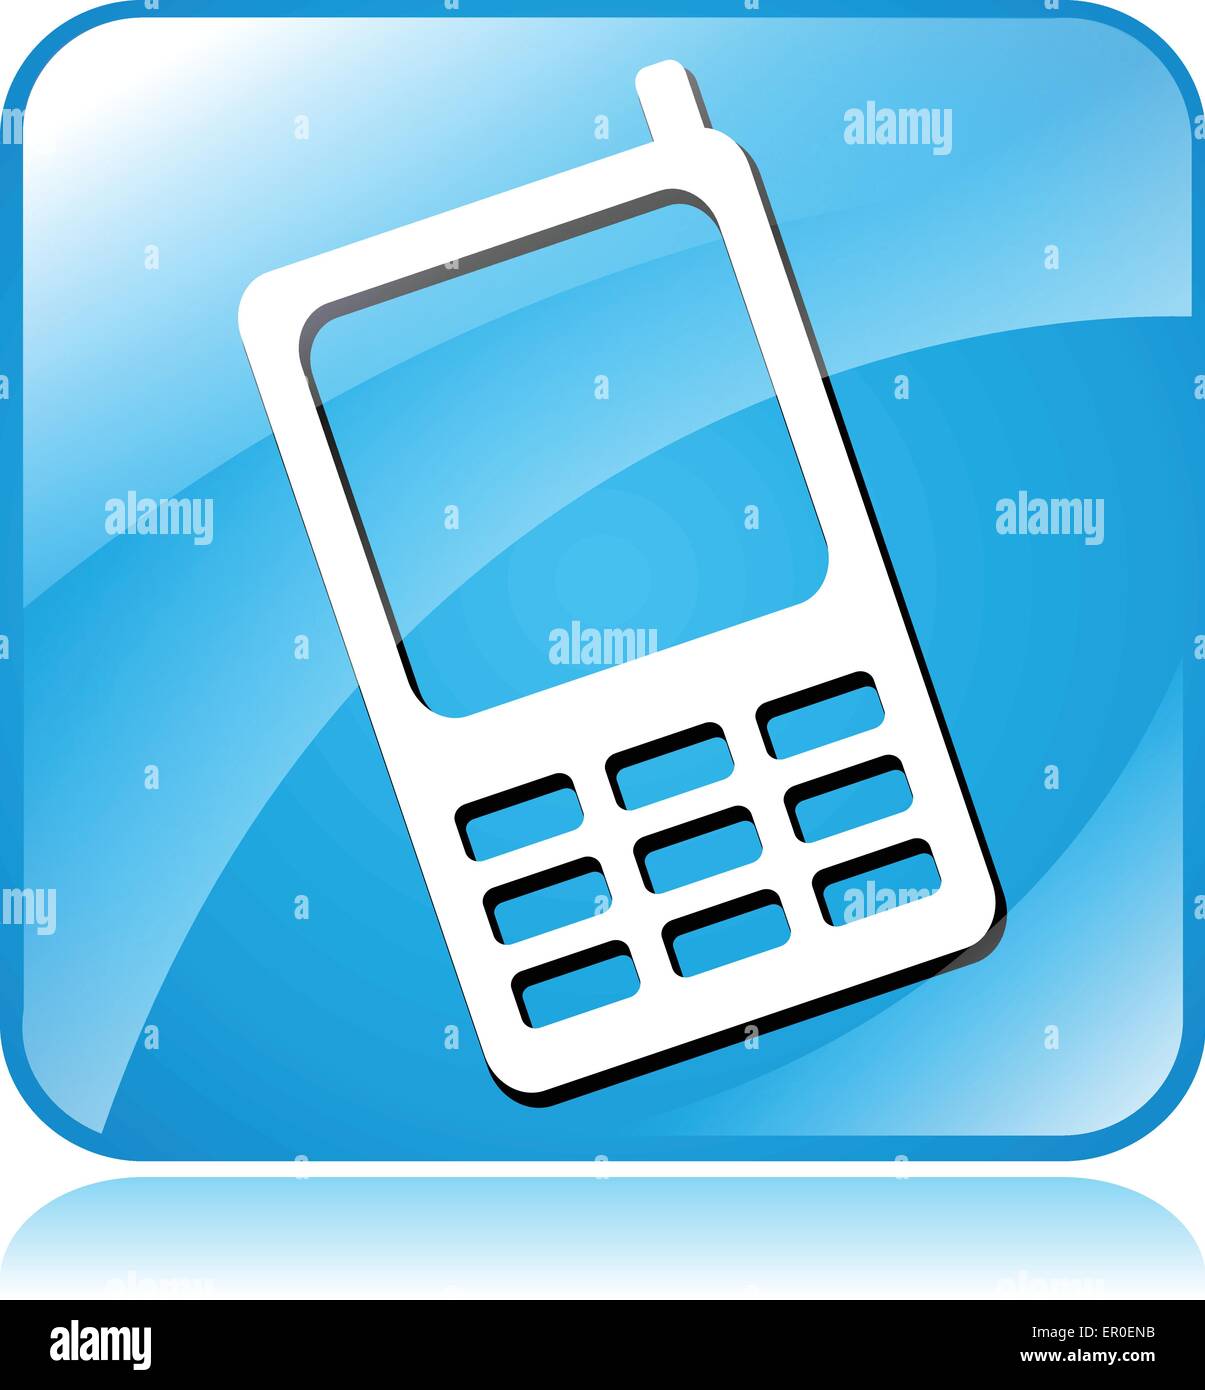 Illustration of blue square design icon for mobile phone Stock Vector